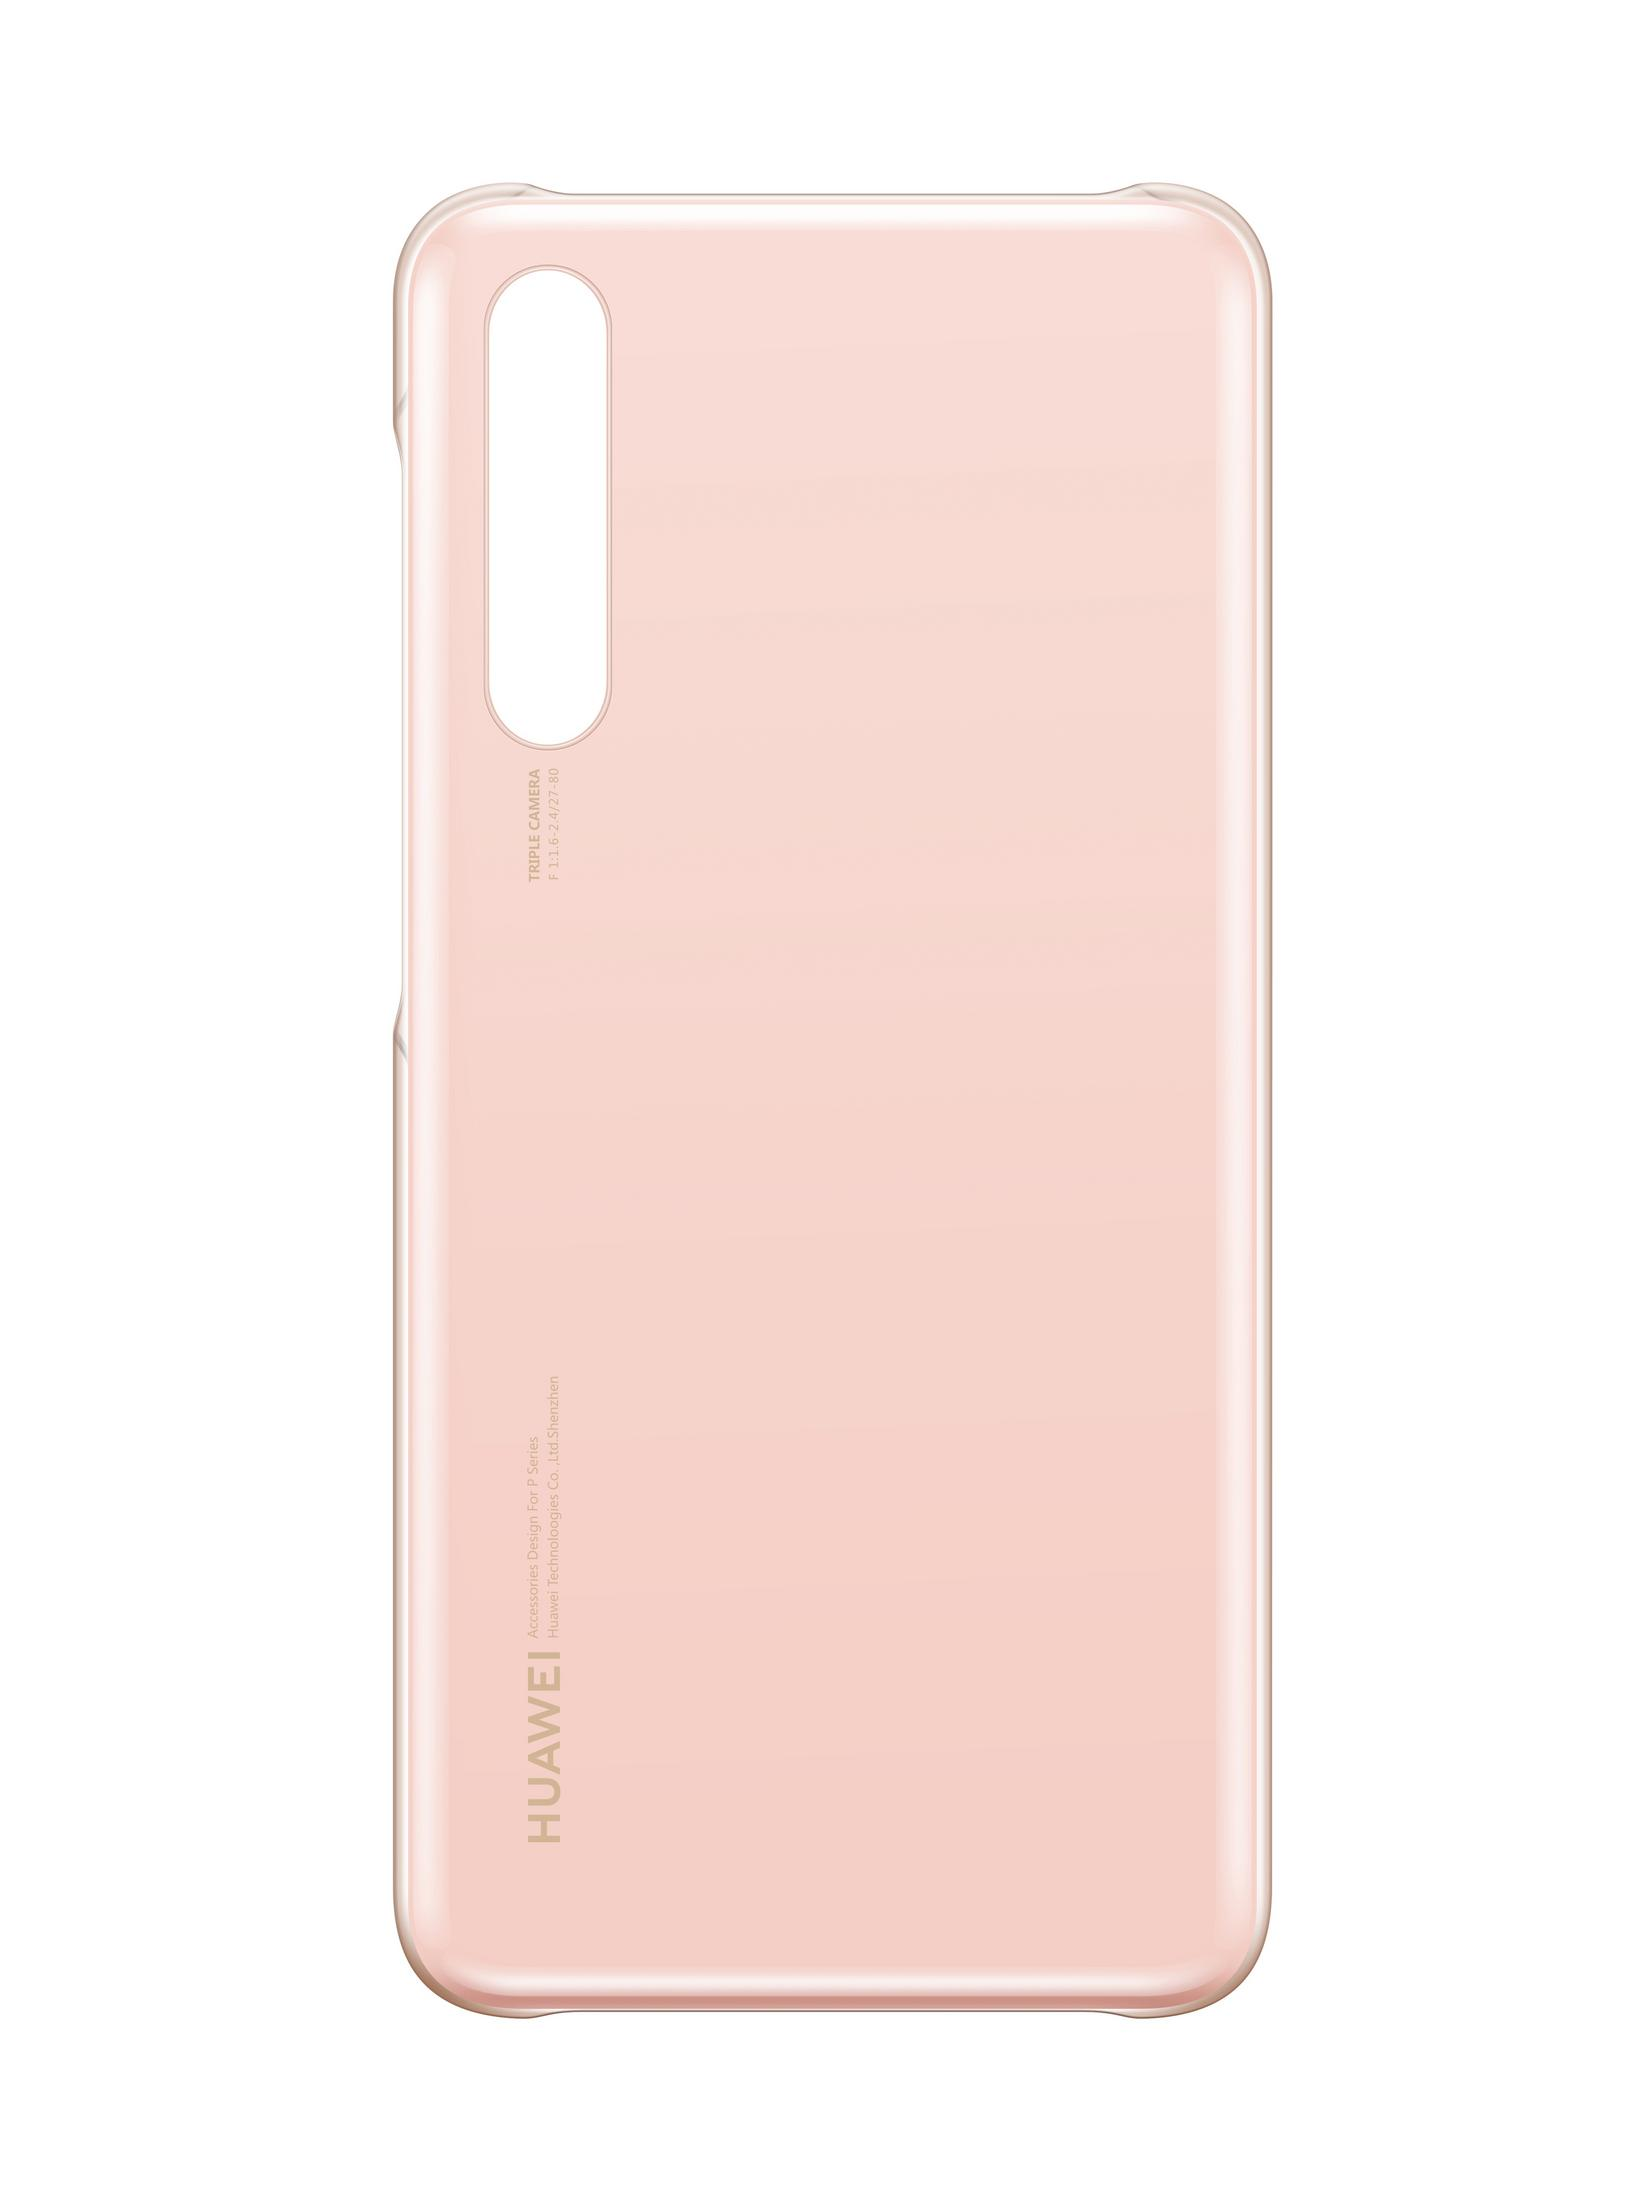 Huawei, 51992376 P20 HUAWEI CASE Pink Backcover, PRO COLOR P20 PINK, Pro,